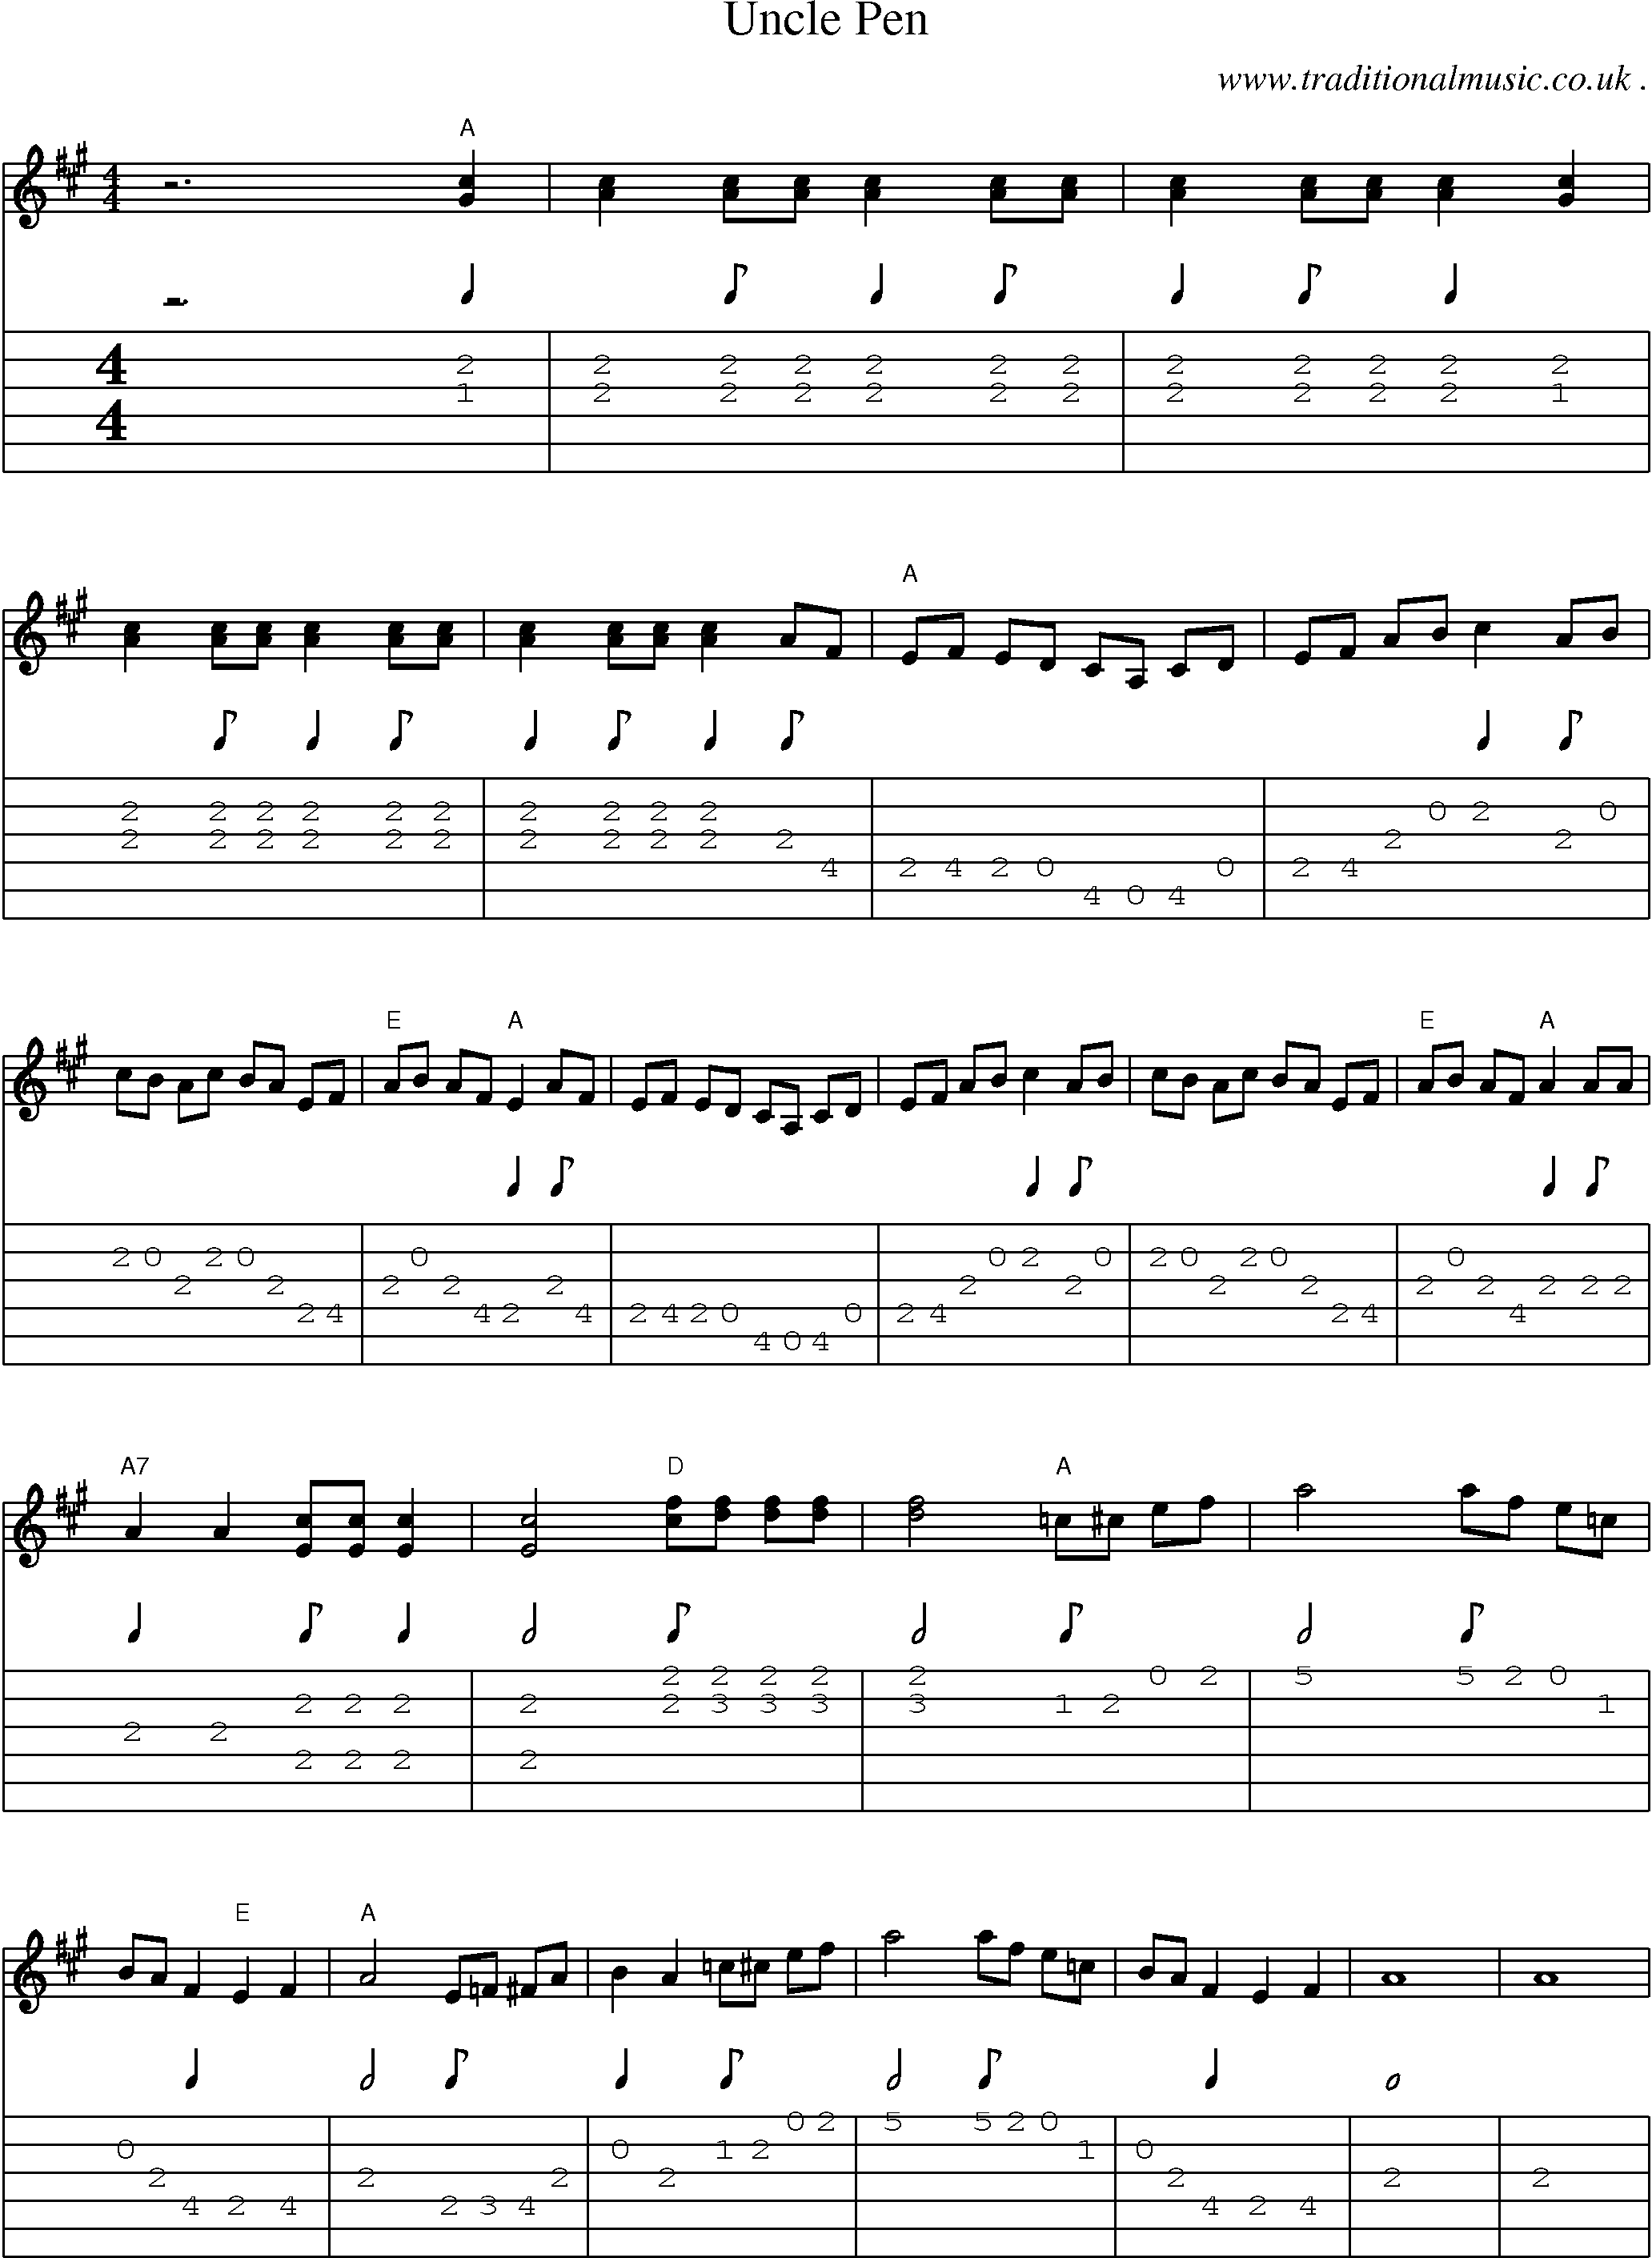 Music Score and Guitar Tabs for Uncle Pen